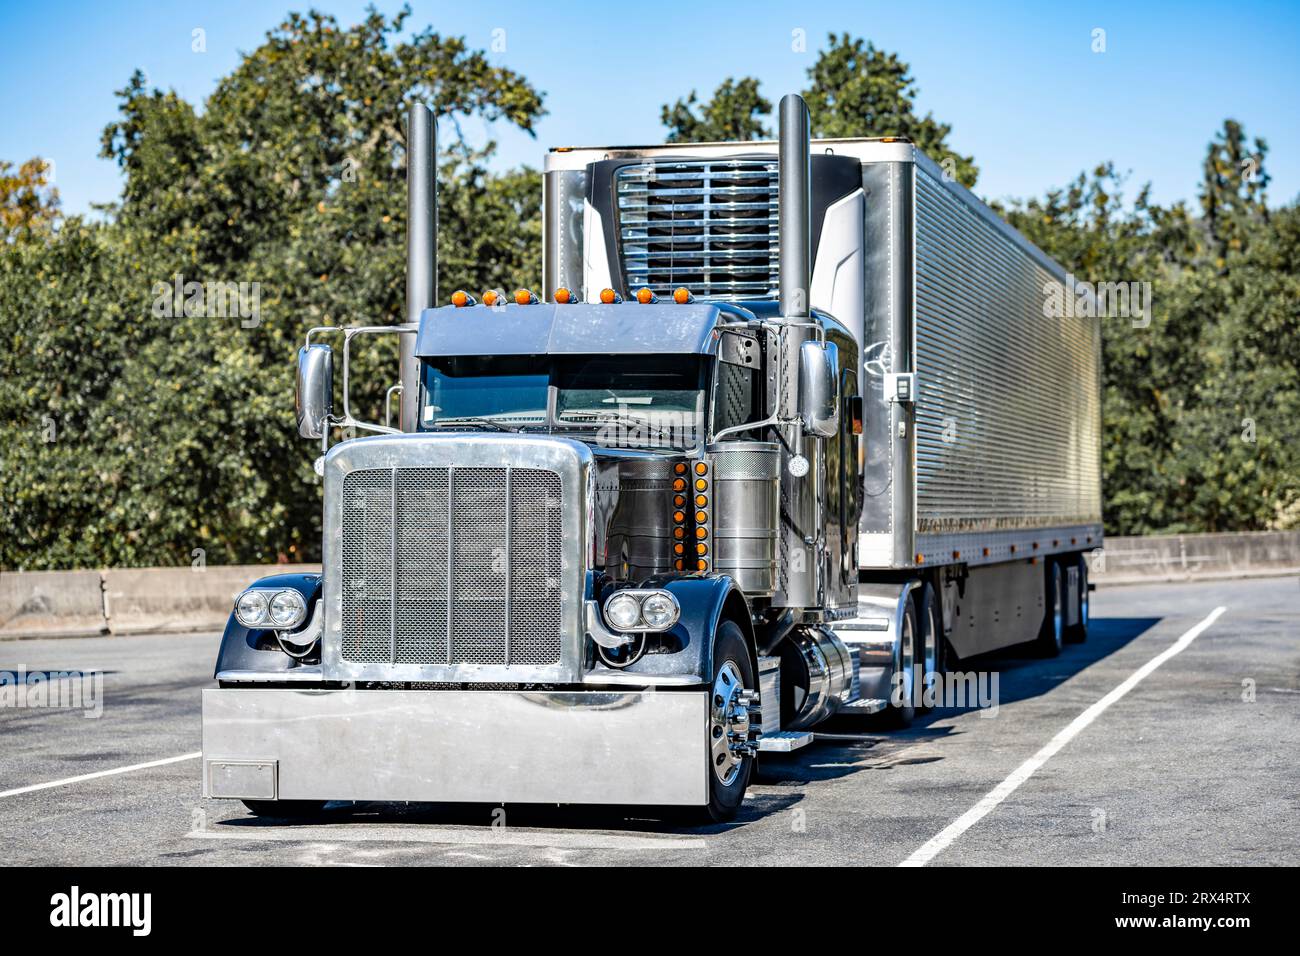 Industrial long hauler classic carrier black big rig semi truck tractor with extended cab for truck driver rest  transporting cargo in refrigerator se Stock Photo